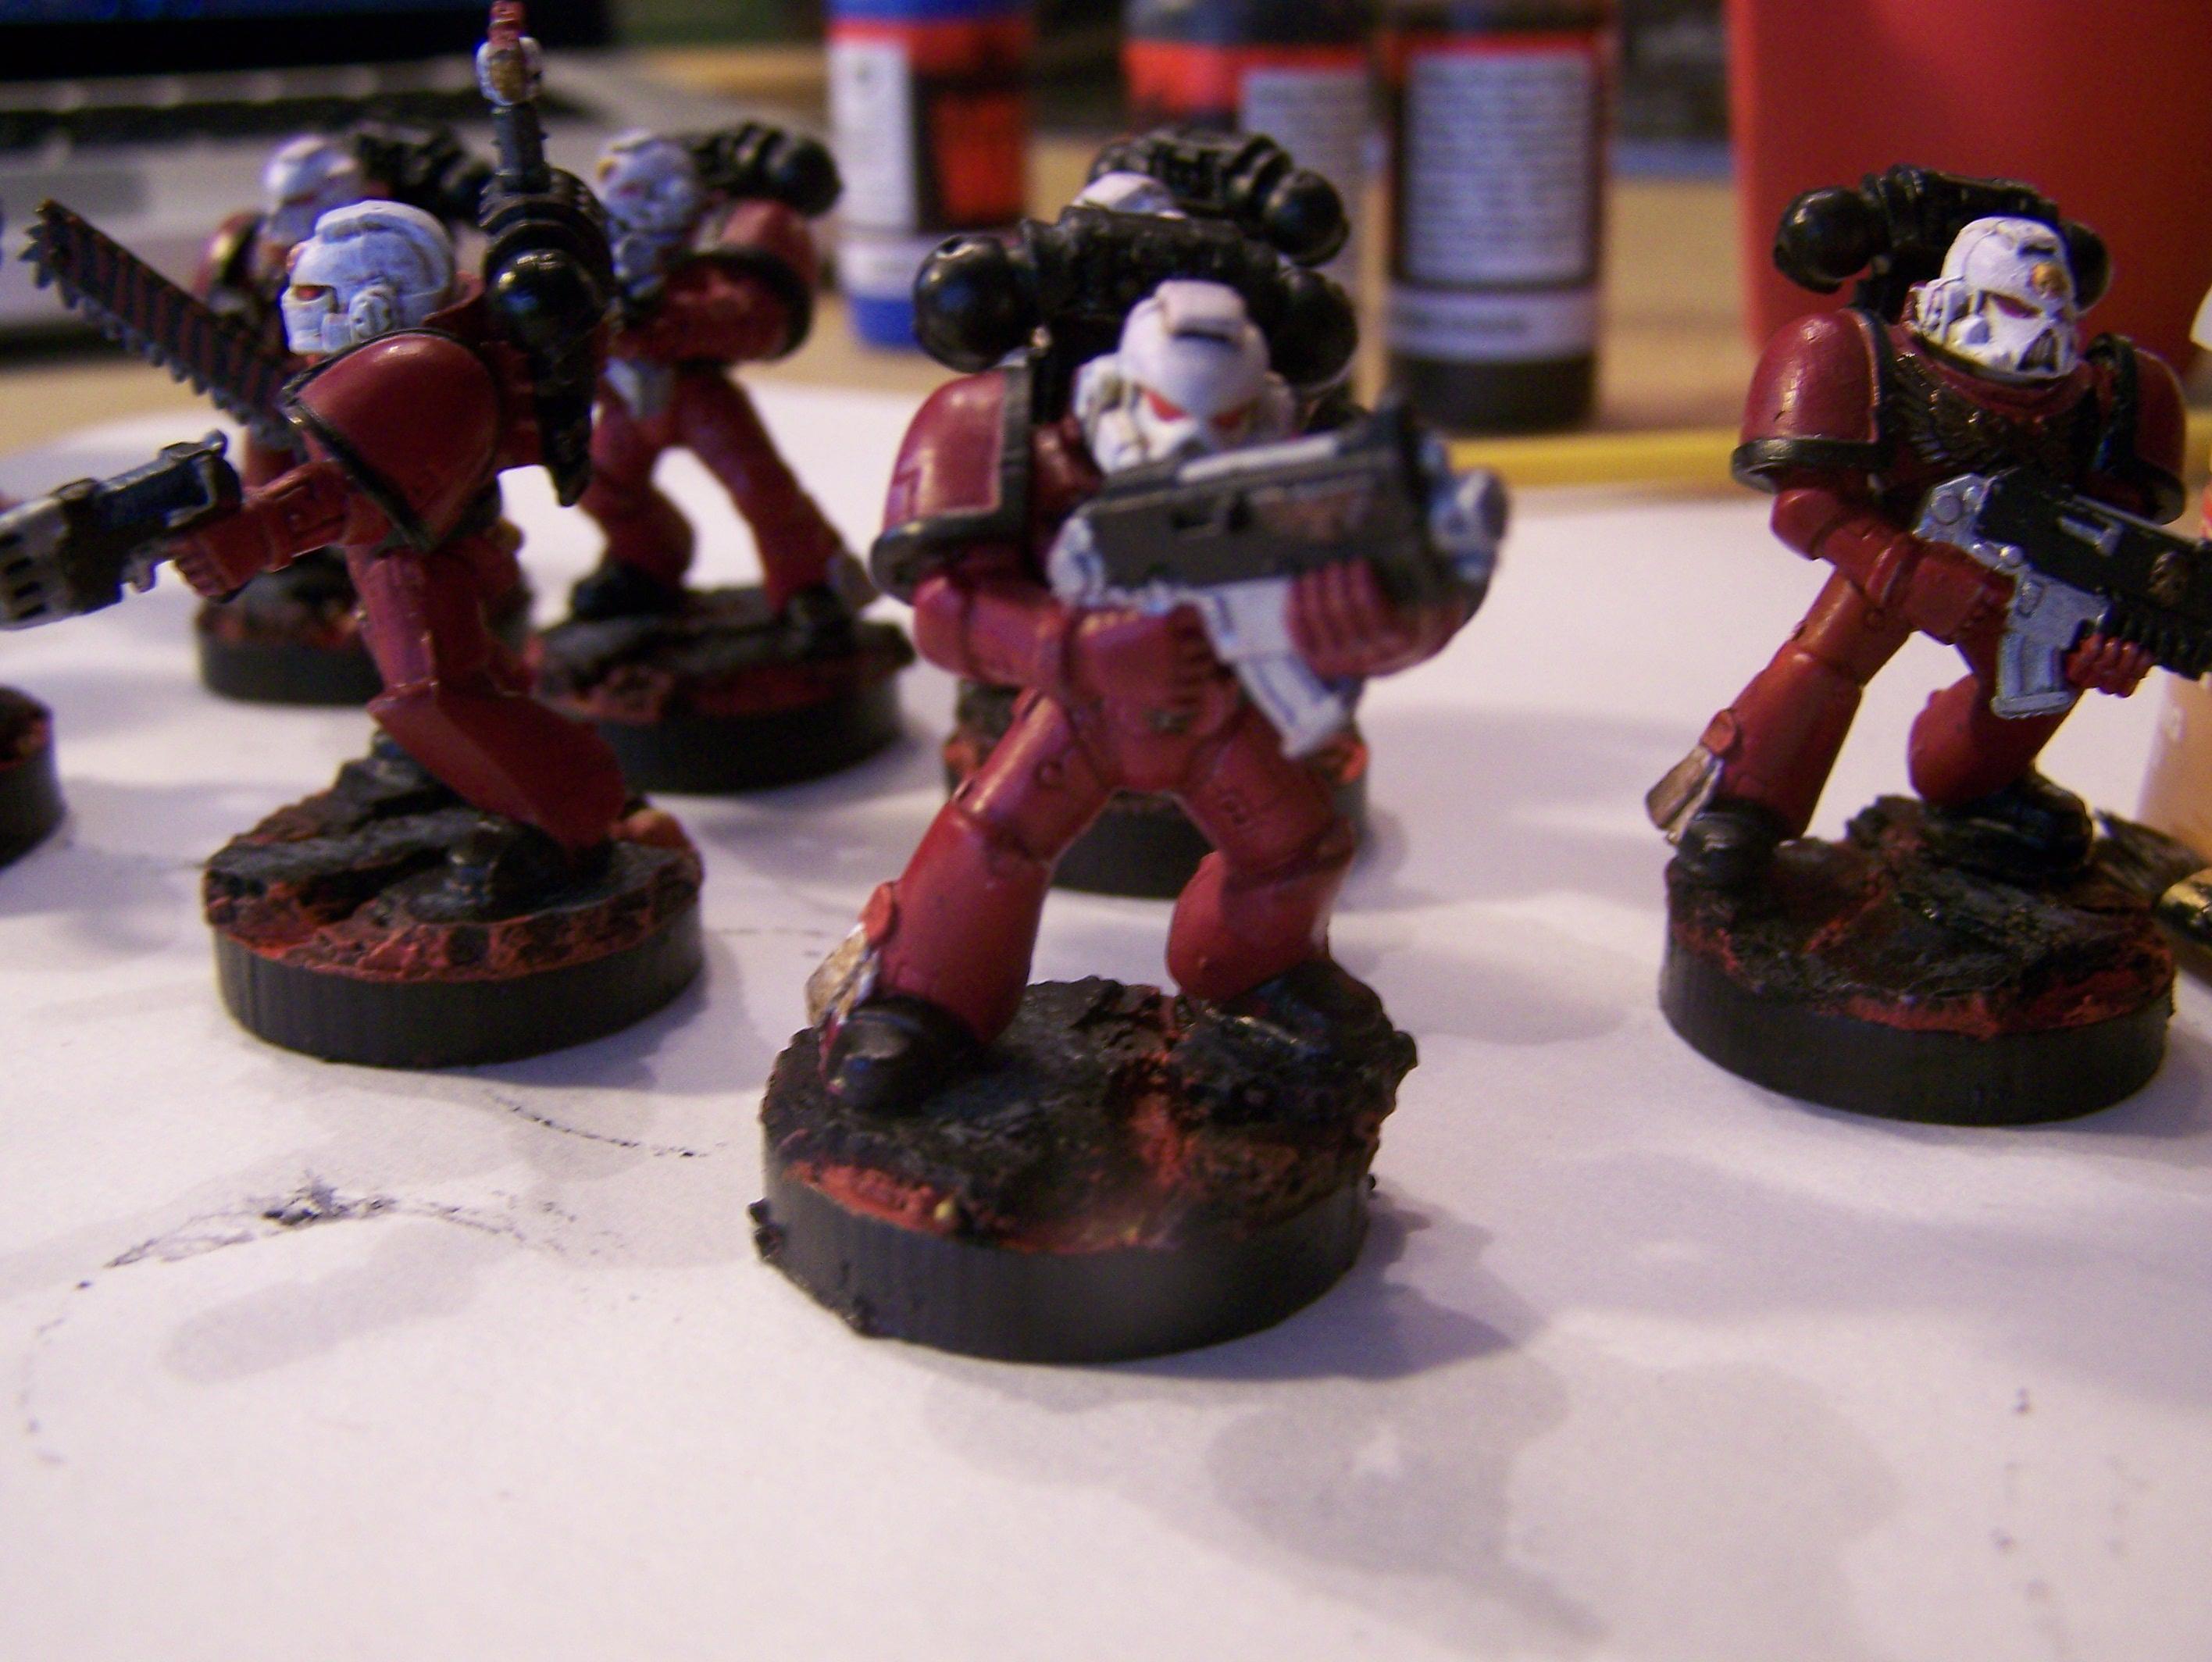 And just how  their bases look finished